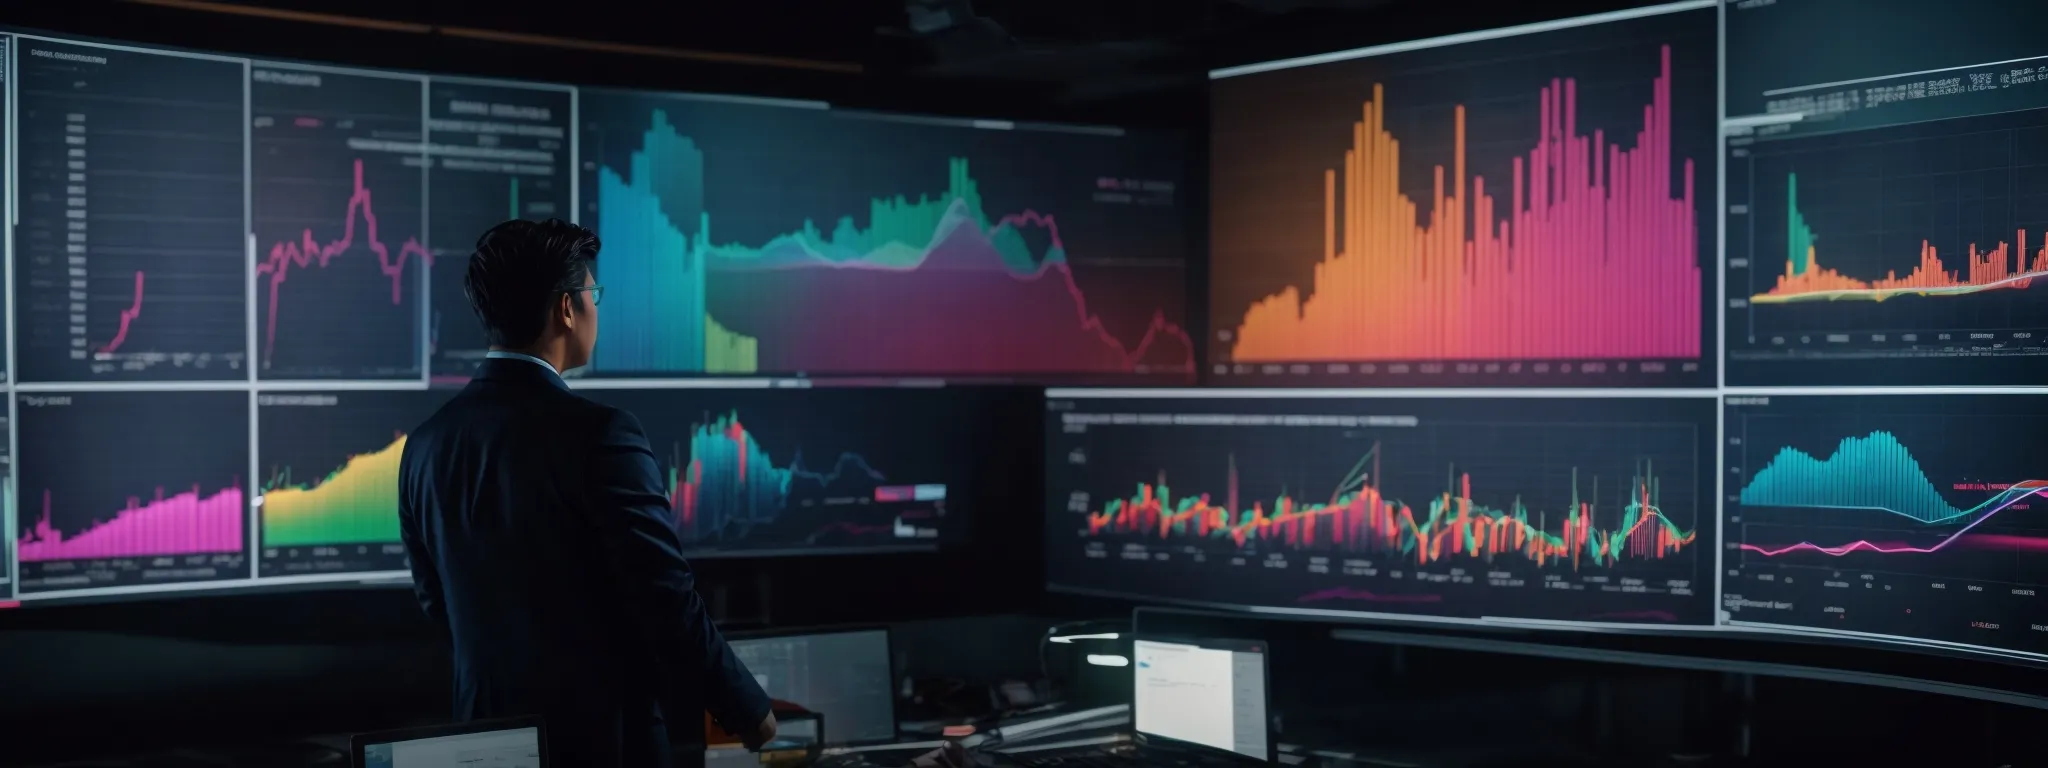 a marketer analyzing data on a large screen displaying colorful graphs and charts related to digital engagement.